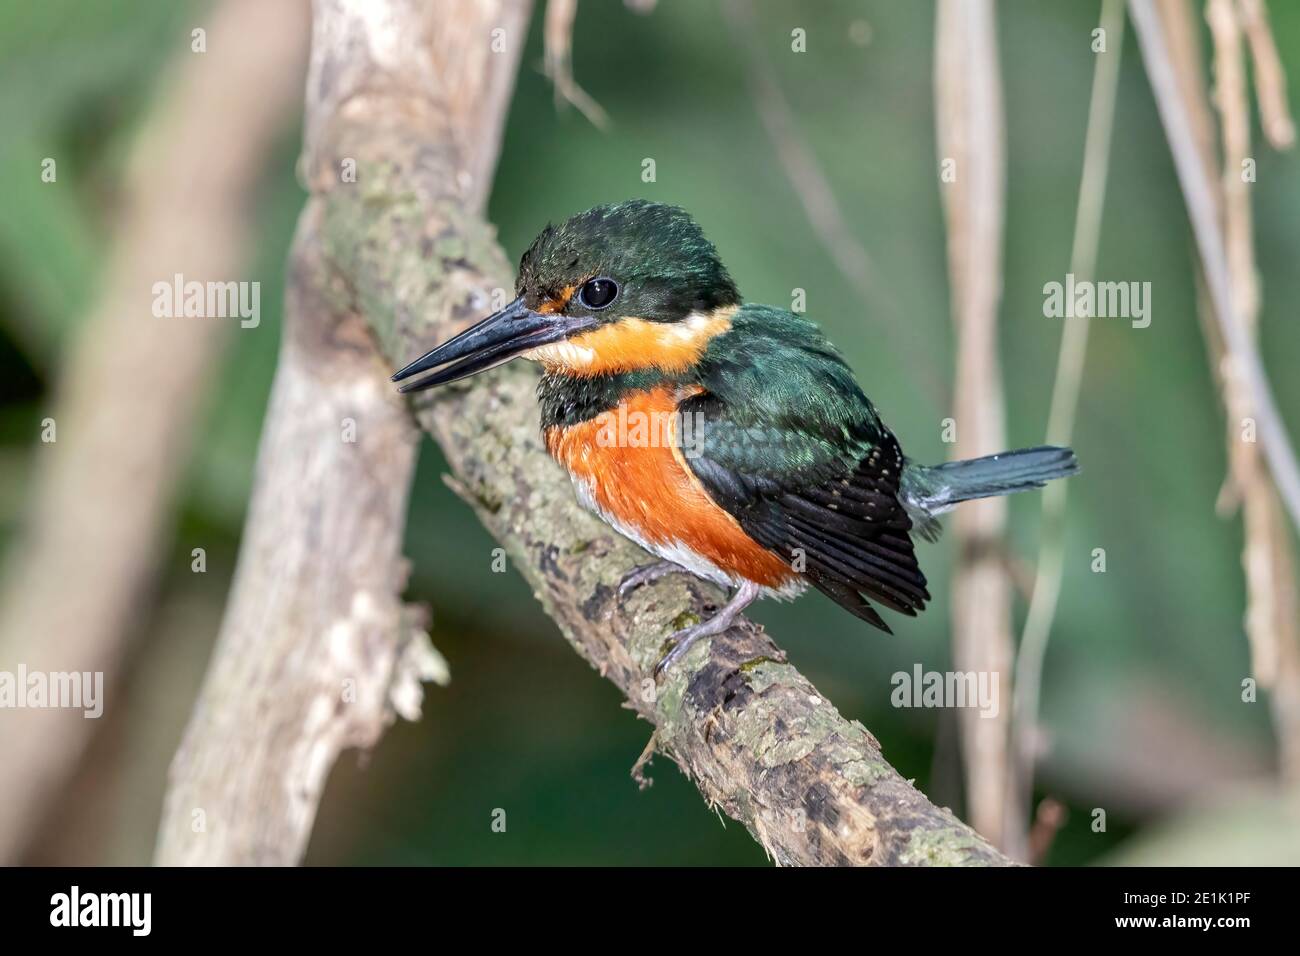 American Pygmy Kingfisher, single adult perched on tree, Costa Rica, 28 March 2019 Stock Photo